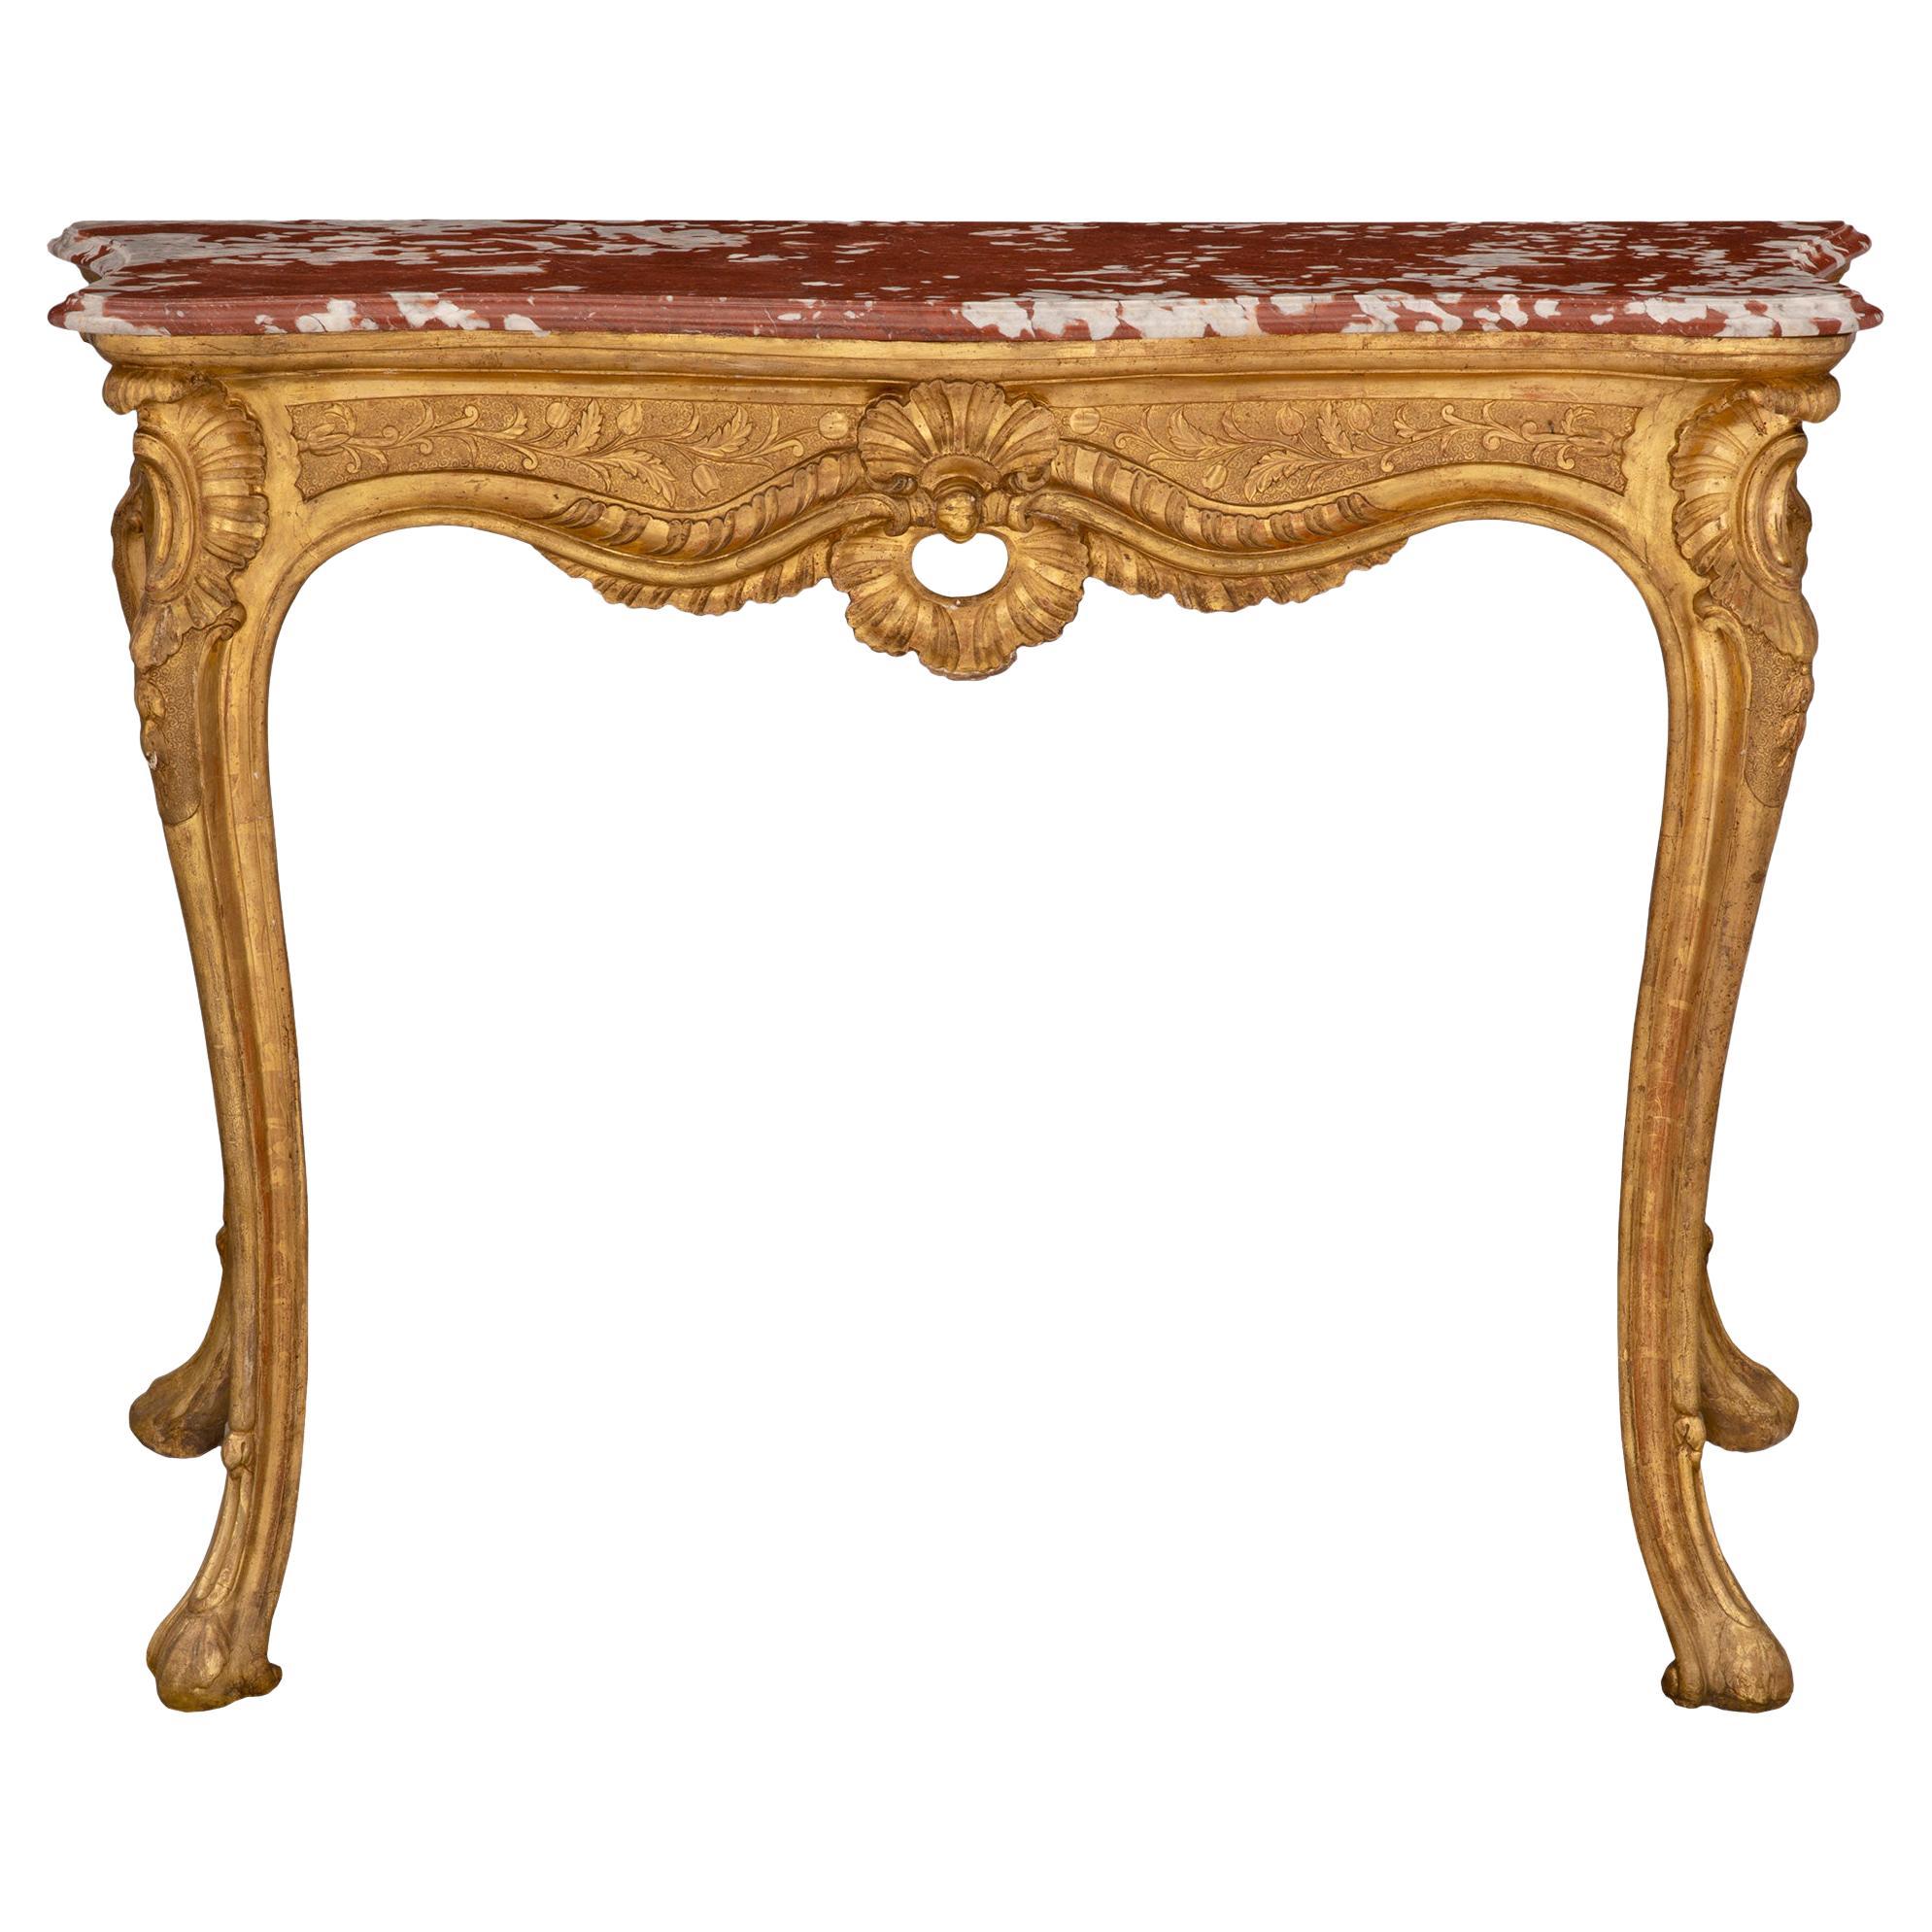 Italian 18th Century Louis XV Period Giltwood and Marble Freestanding Console For Sale